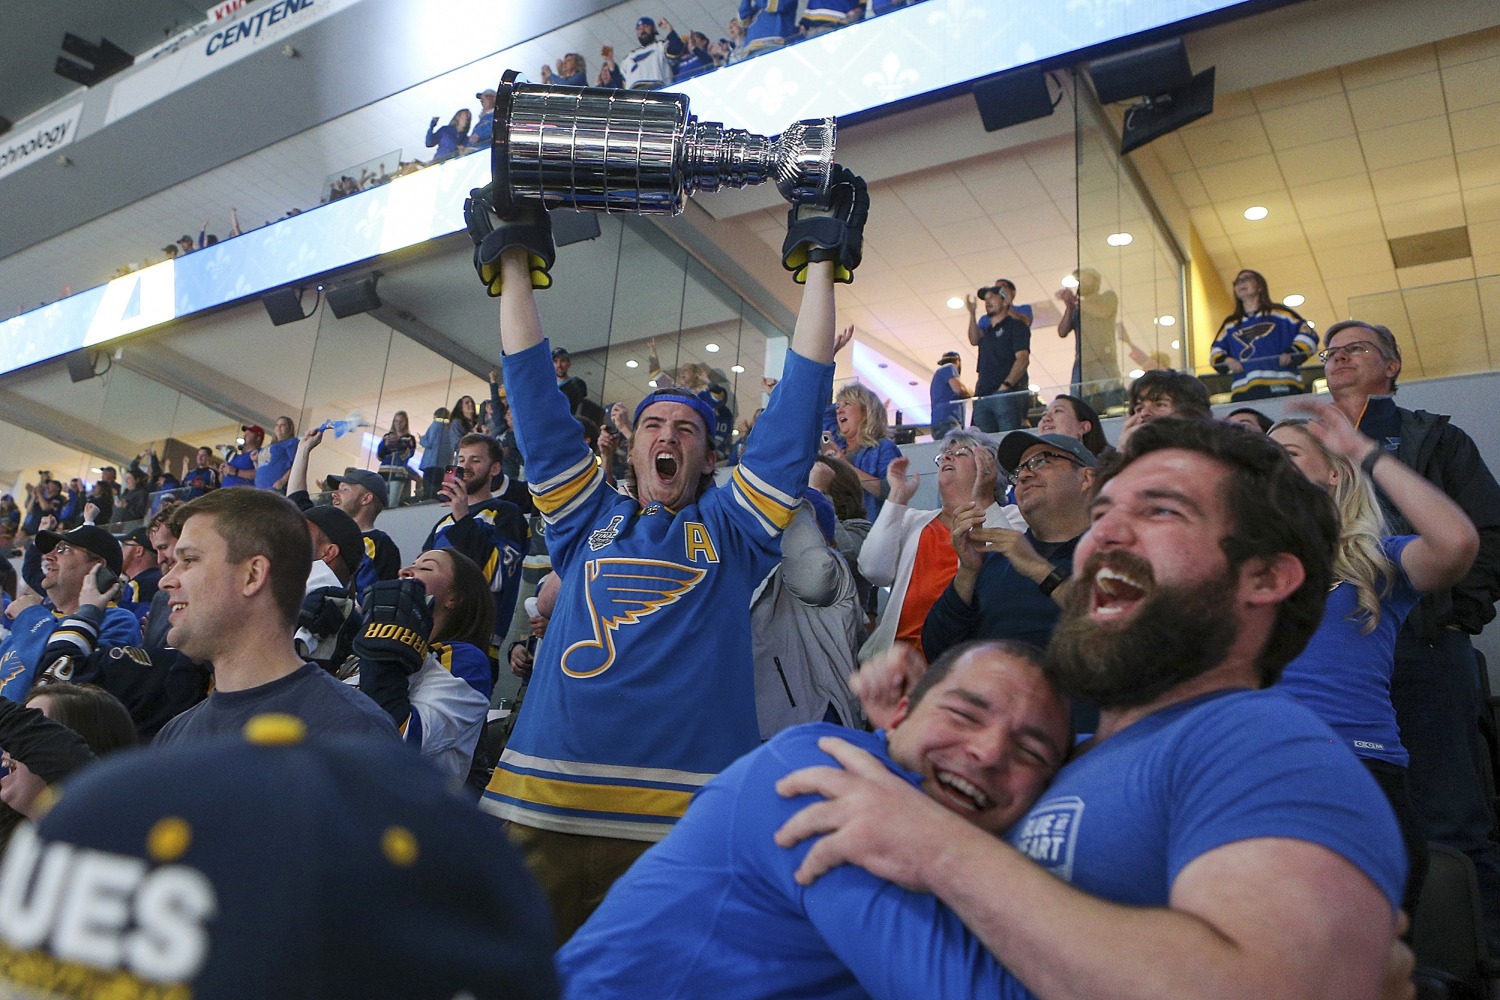 How to watch and stream St. Louis Blues: 2019 Stanley Cup